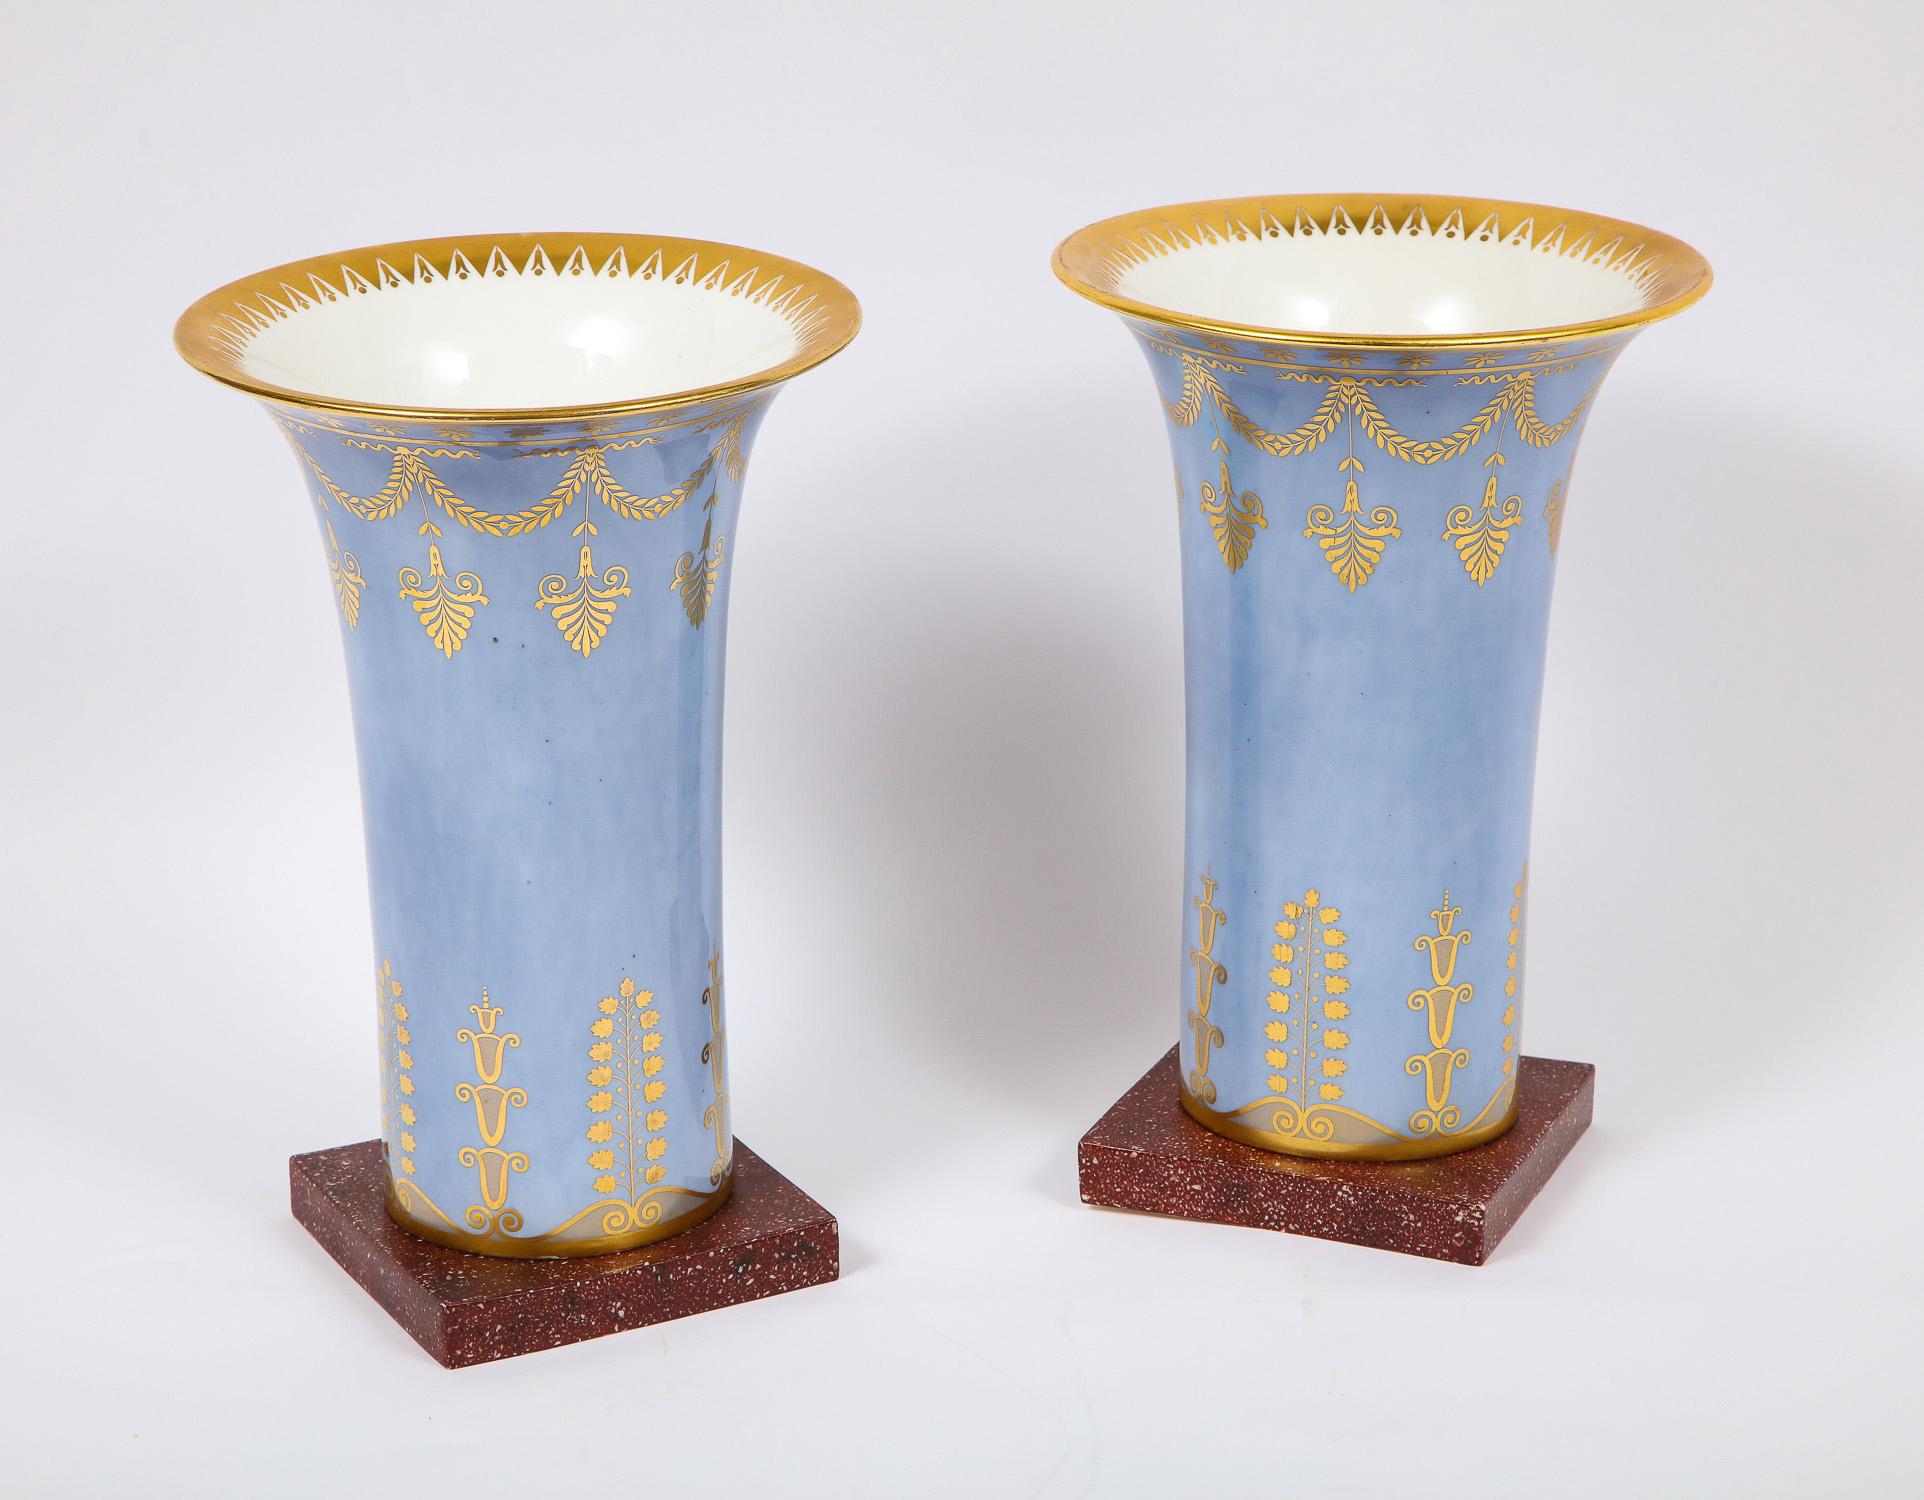 A very unusual and quite large pair of Empire period Sèvres Porcelain pale Celeste blue and faux porphyry ground vases. Each vase is intricately hand painted with meticulous detail and further adorned with 24-karat hand painted gilt decoration. The